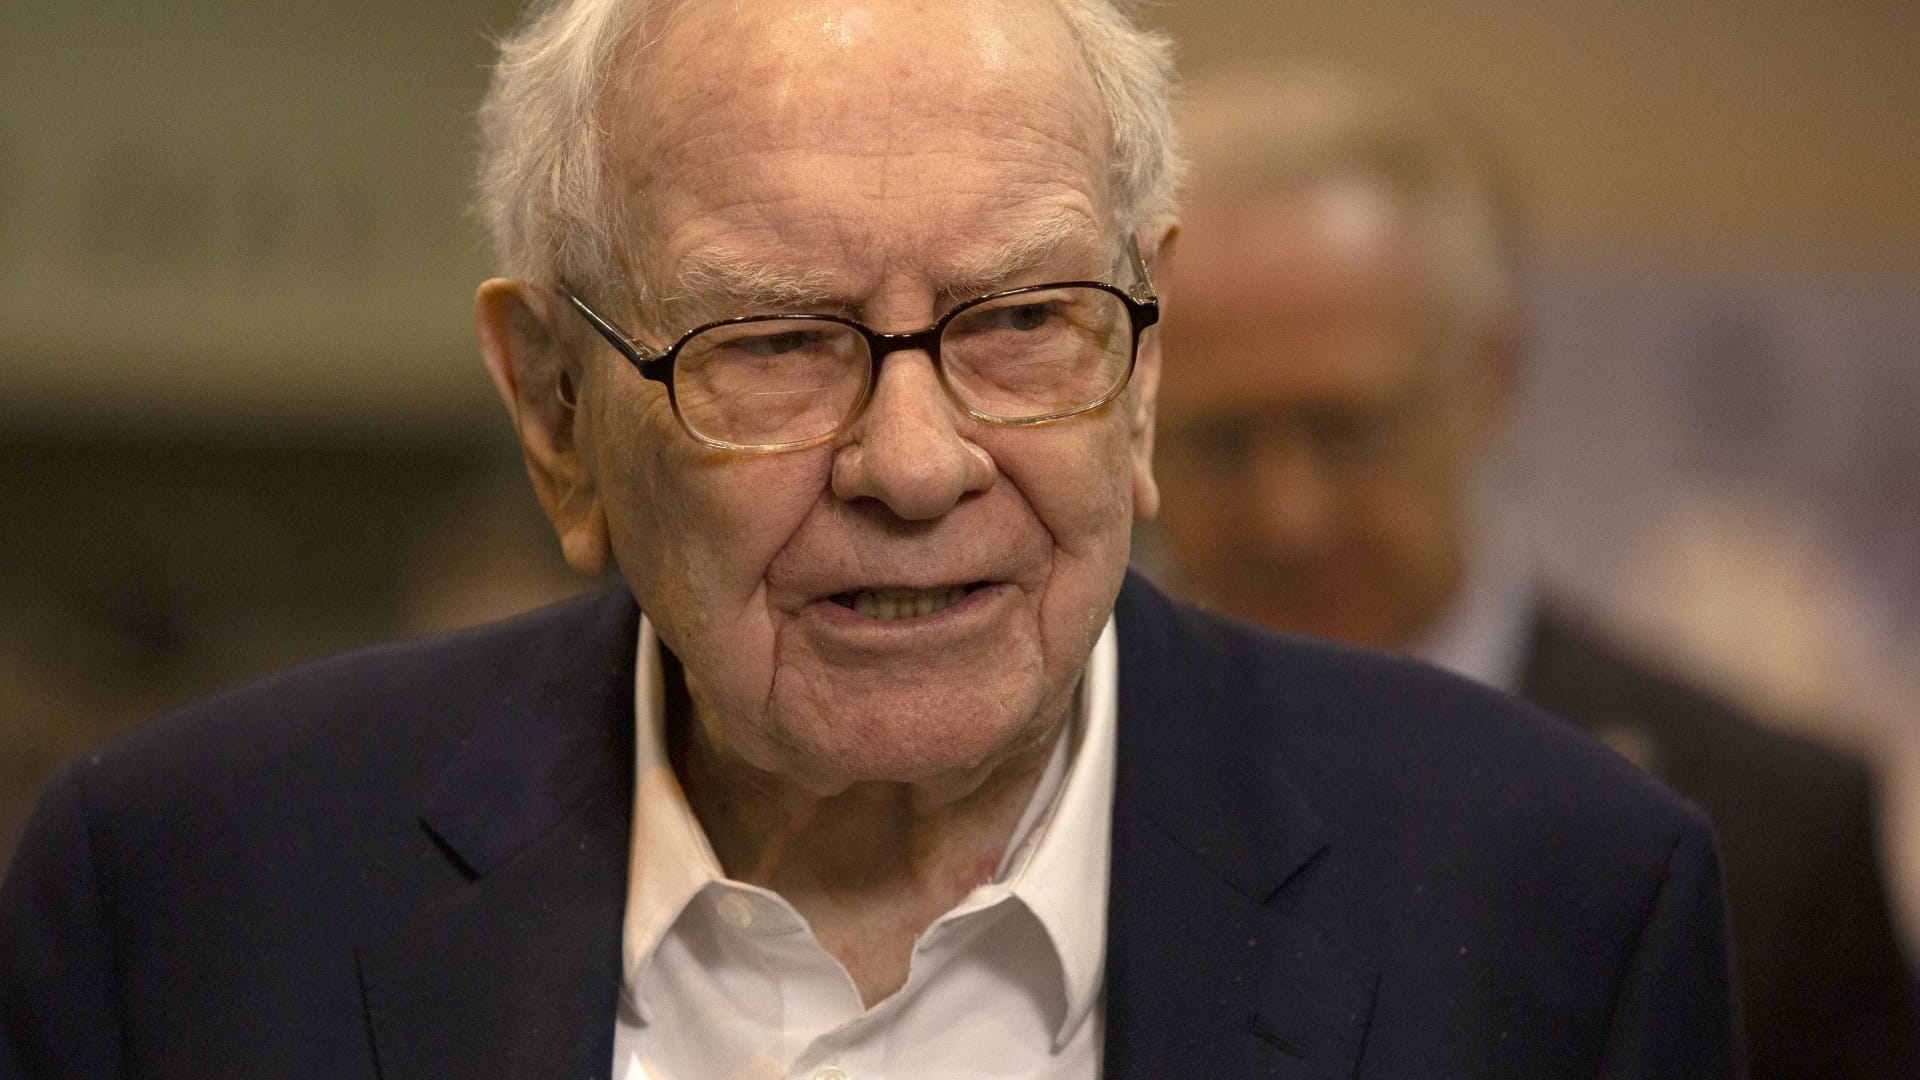 Warren Buffett’s Berkshire Hathaway cut Apple investment by about 13% in the first quarter